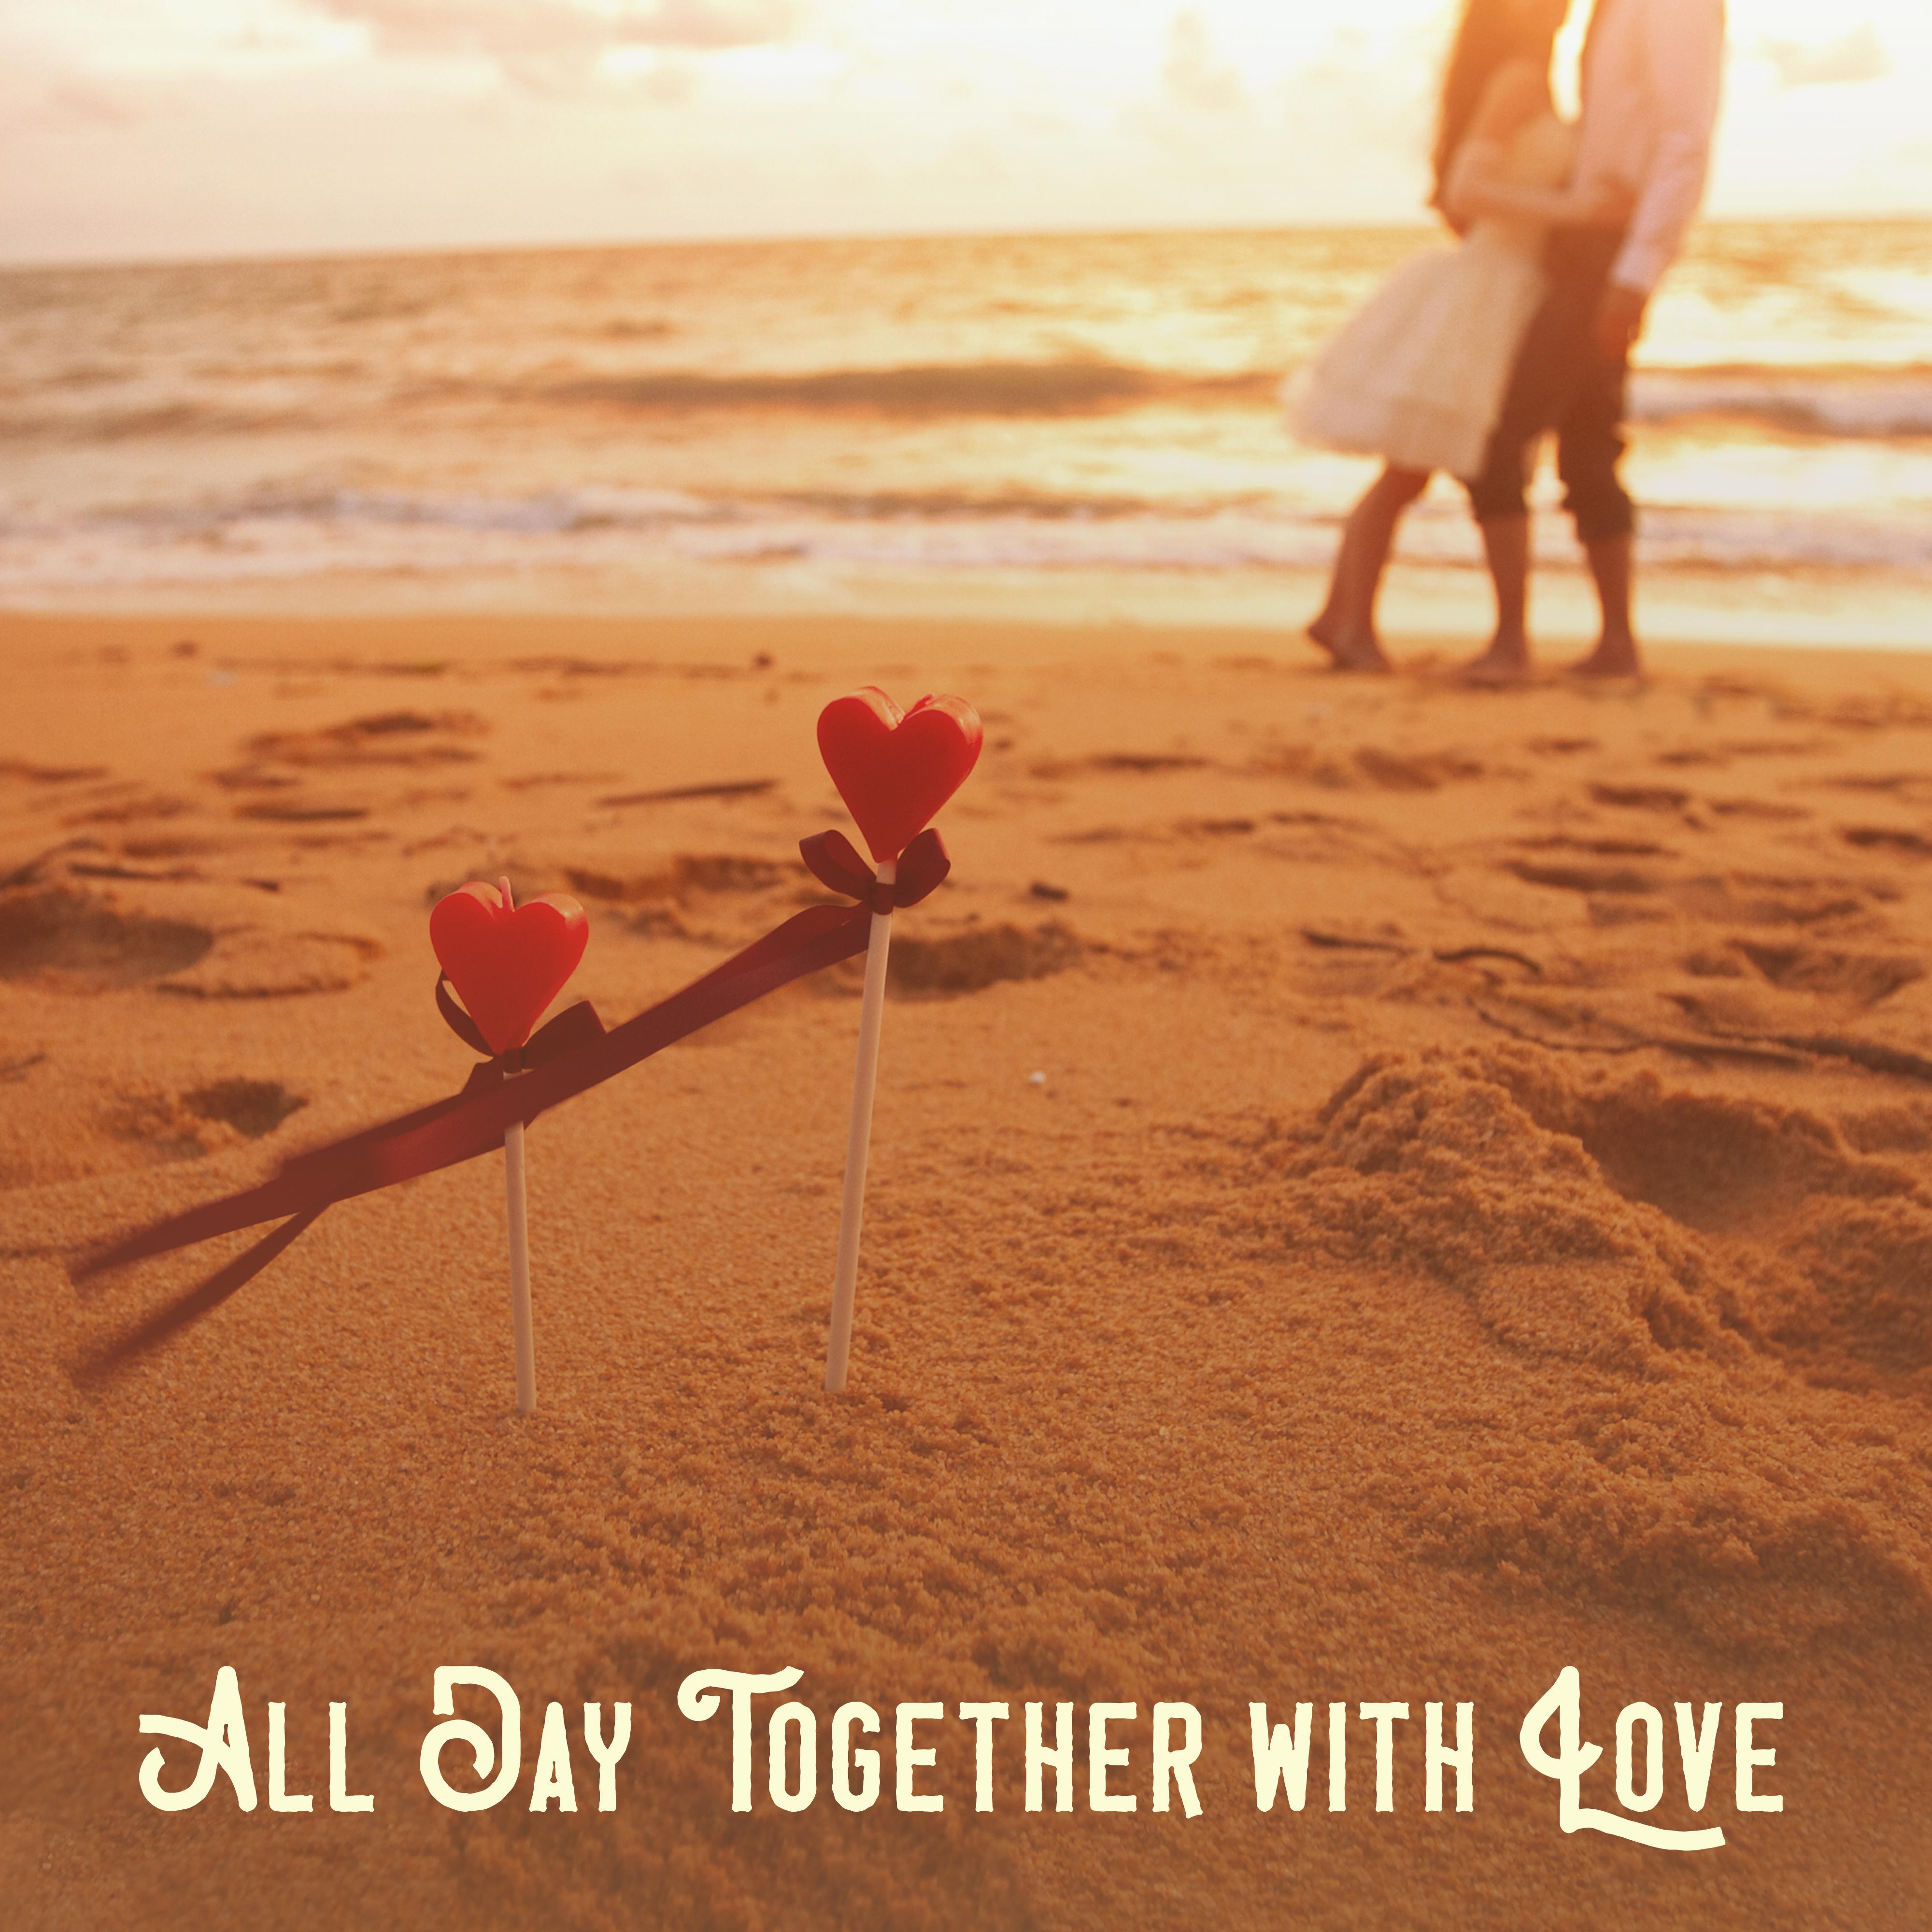 All Day Together with Love: Sensual 2019 Chillout Music for Couples, Nice Day Spending, Romantic Dinner, Erotic Massage, Hot Bath Together, Tantric *** Beats